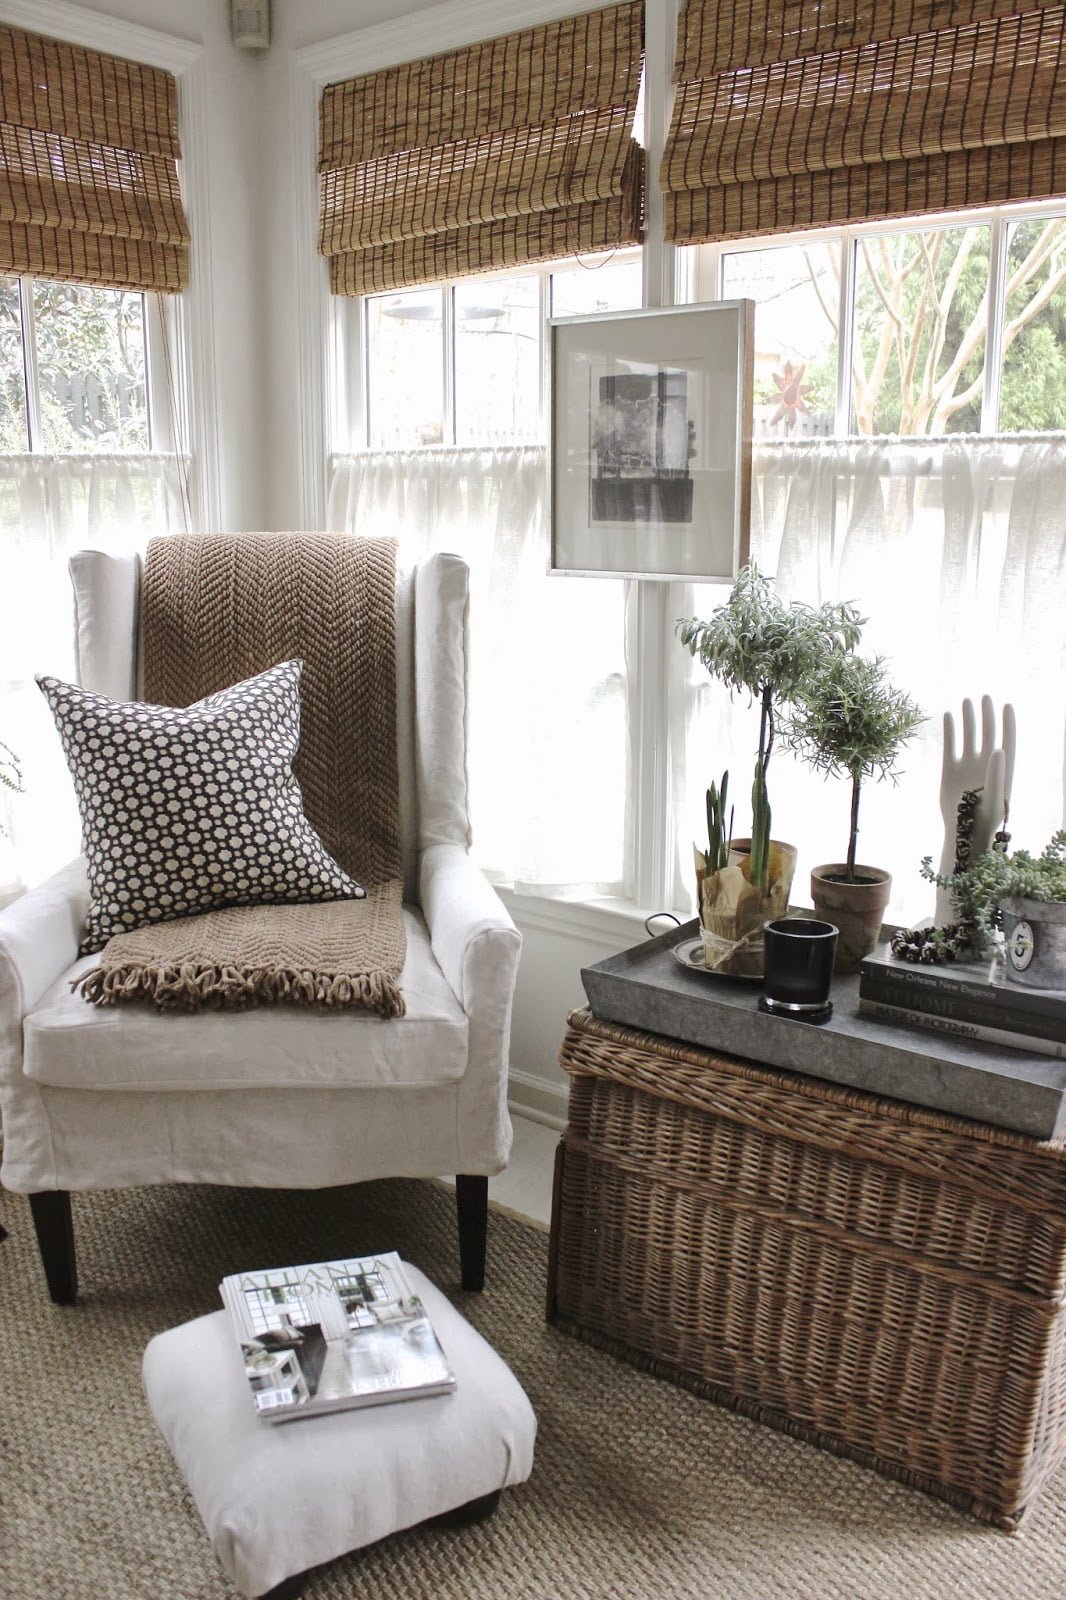 The Neutral Nook with a Touch of Zen